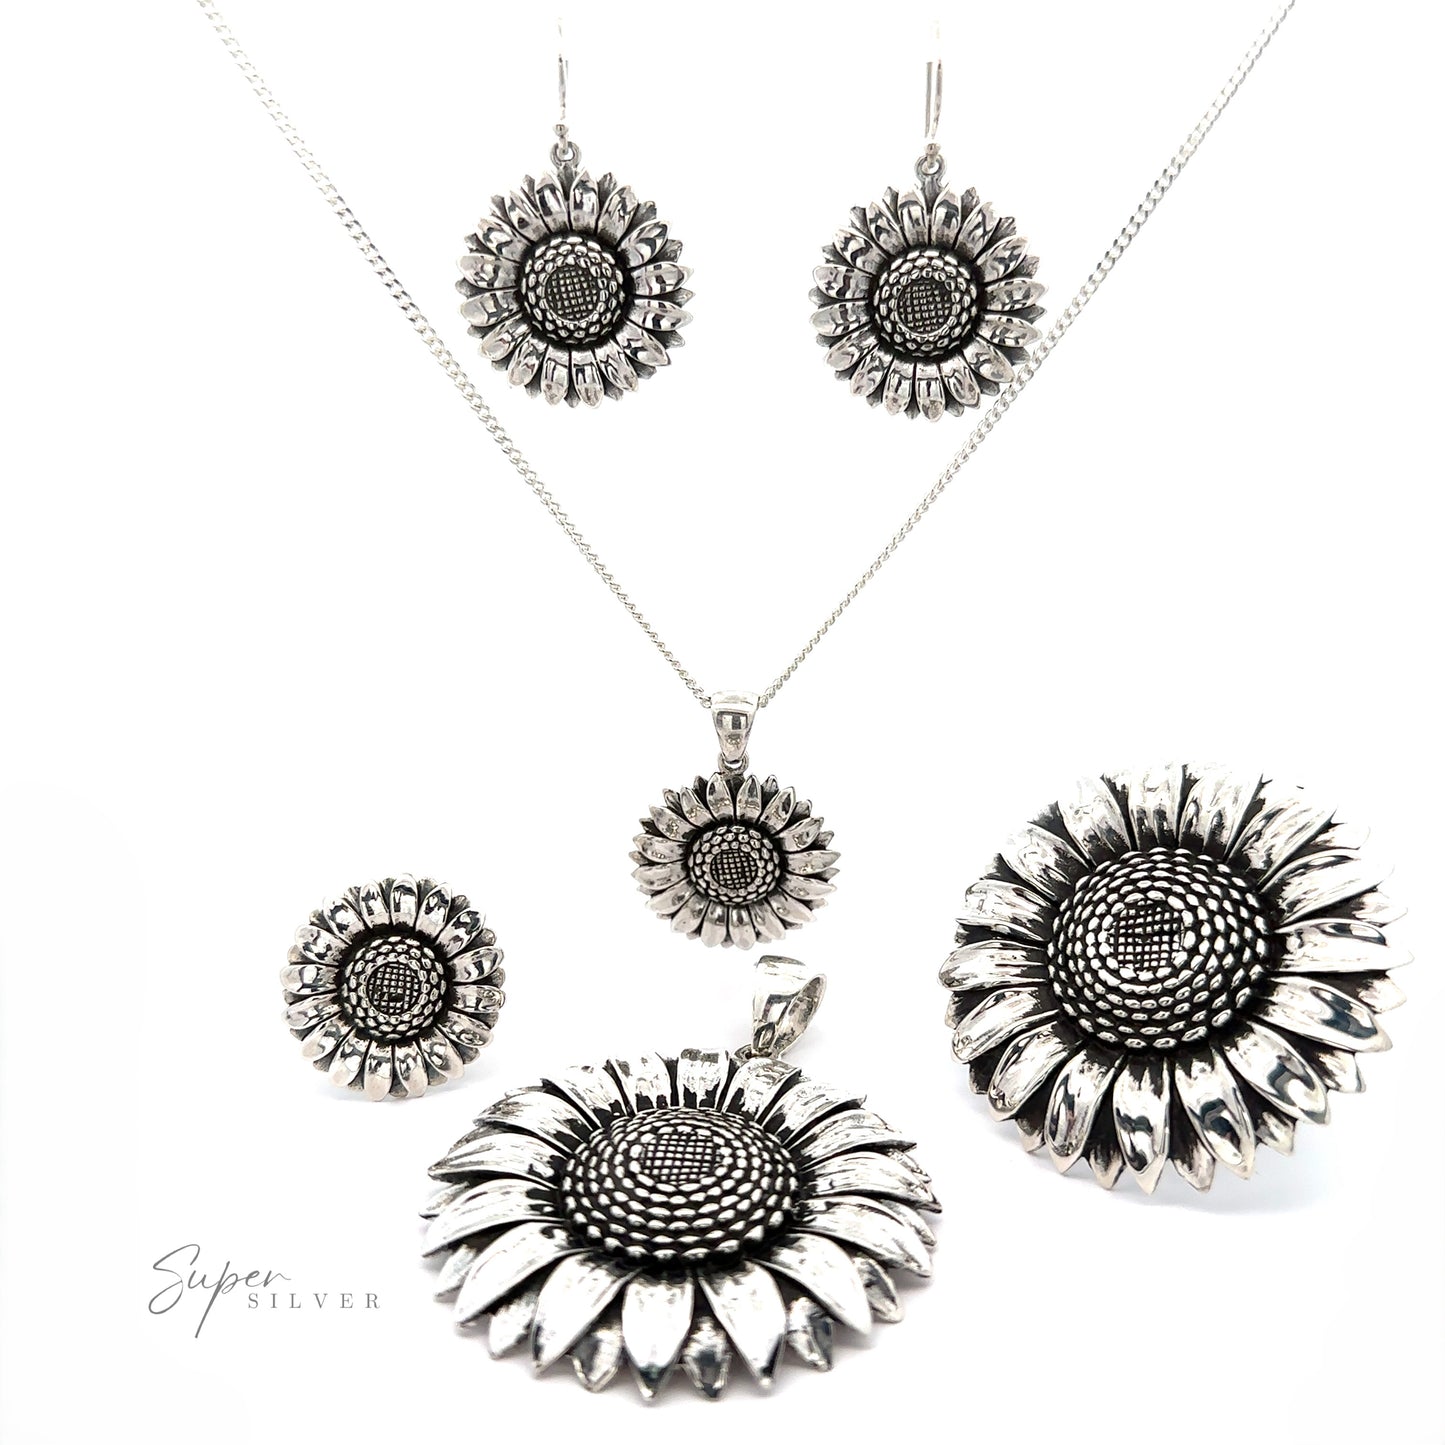 
                  
                    Silver Sunflower jewelry set including a necklace, earrings, and an Adjustable Sunflower Statement Ring displayed against a white background.
                  
                